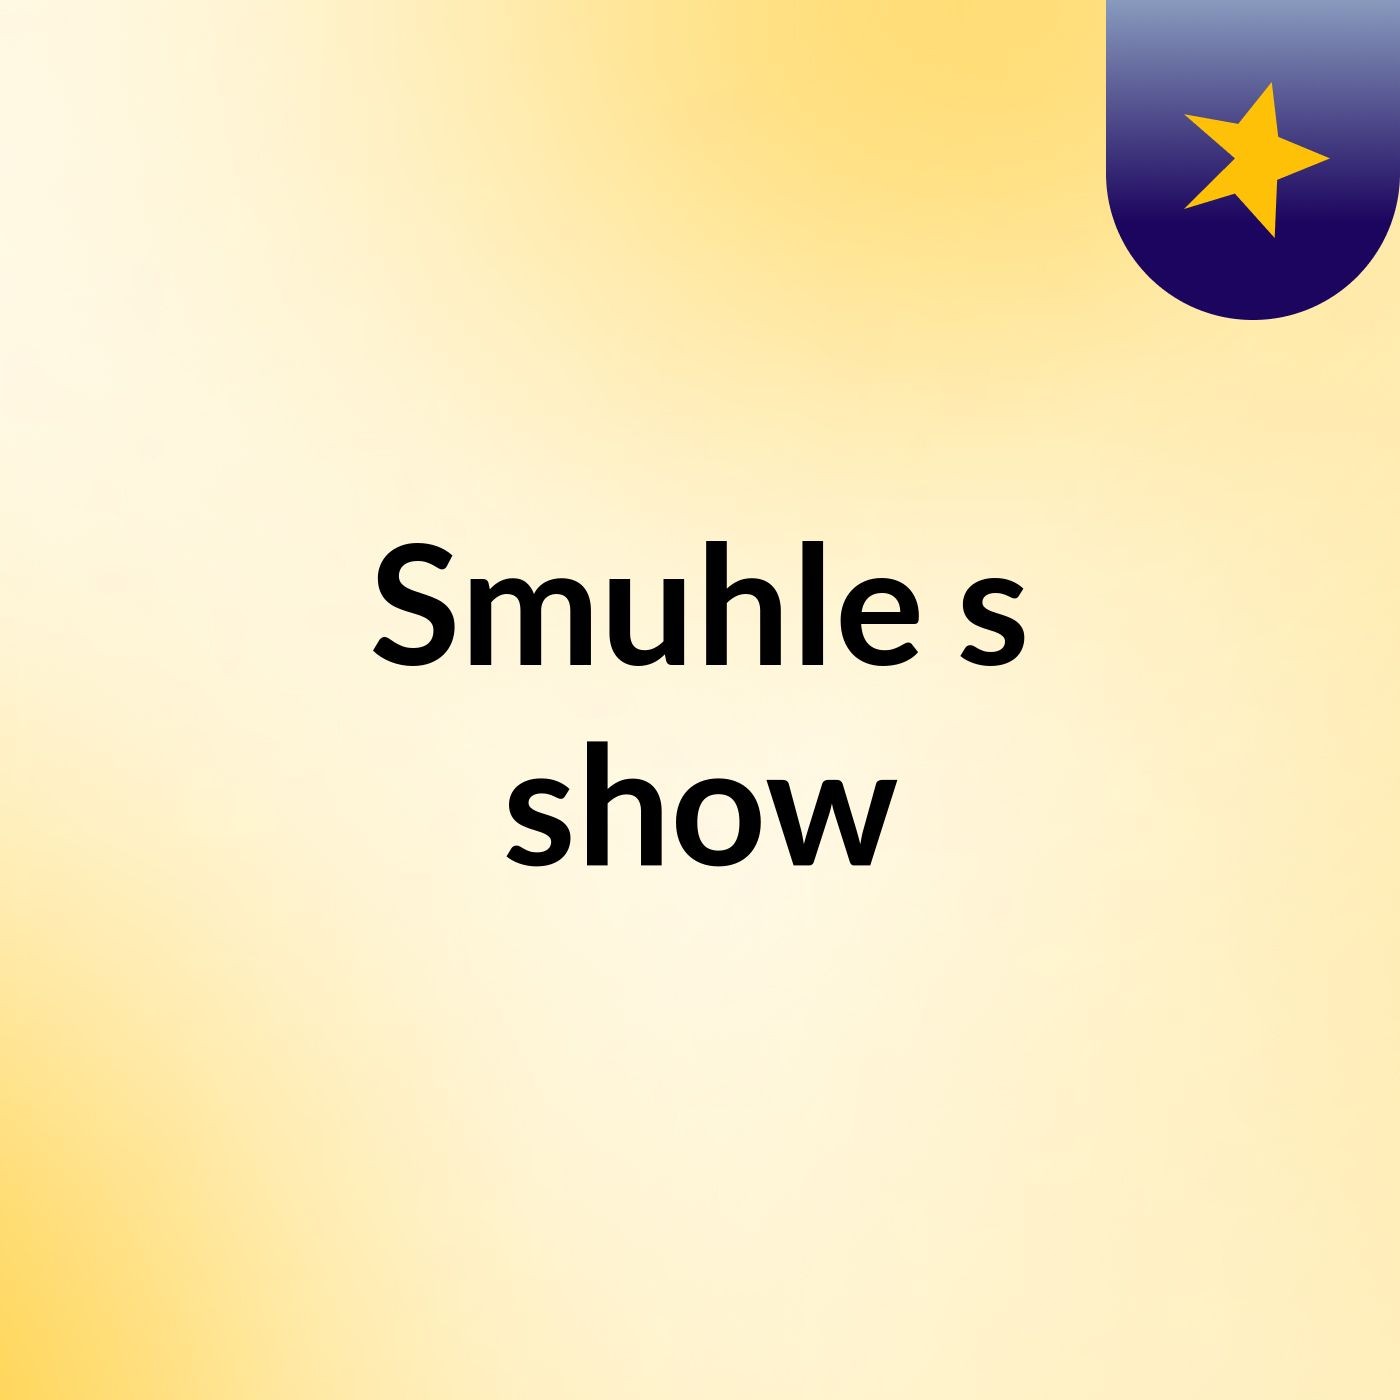 Smuhle's show